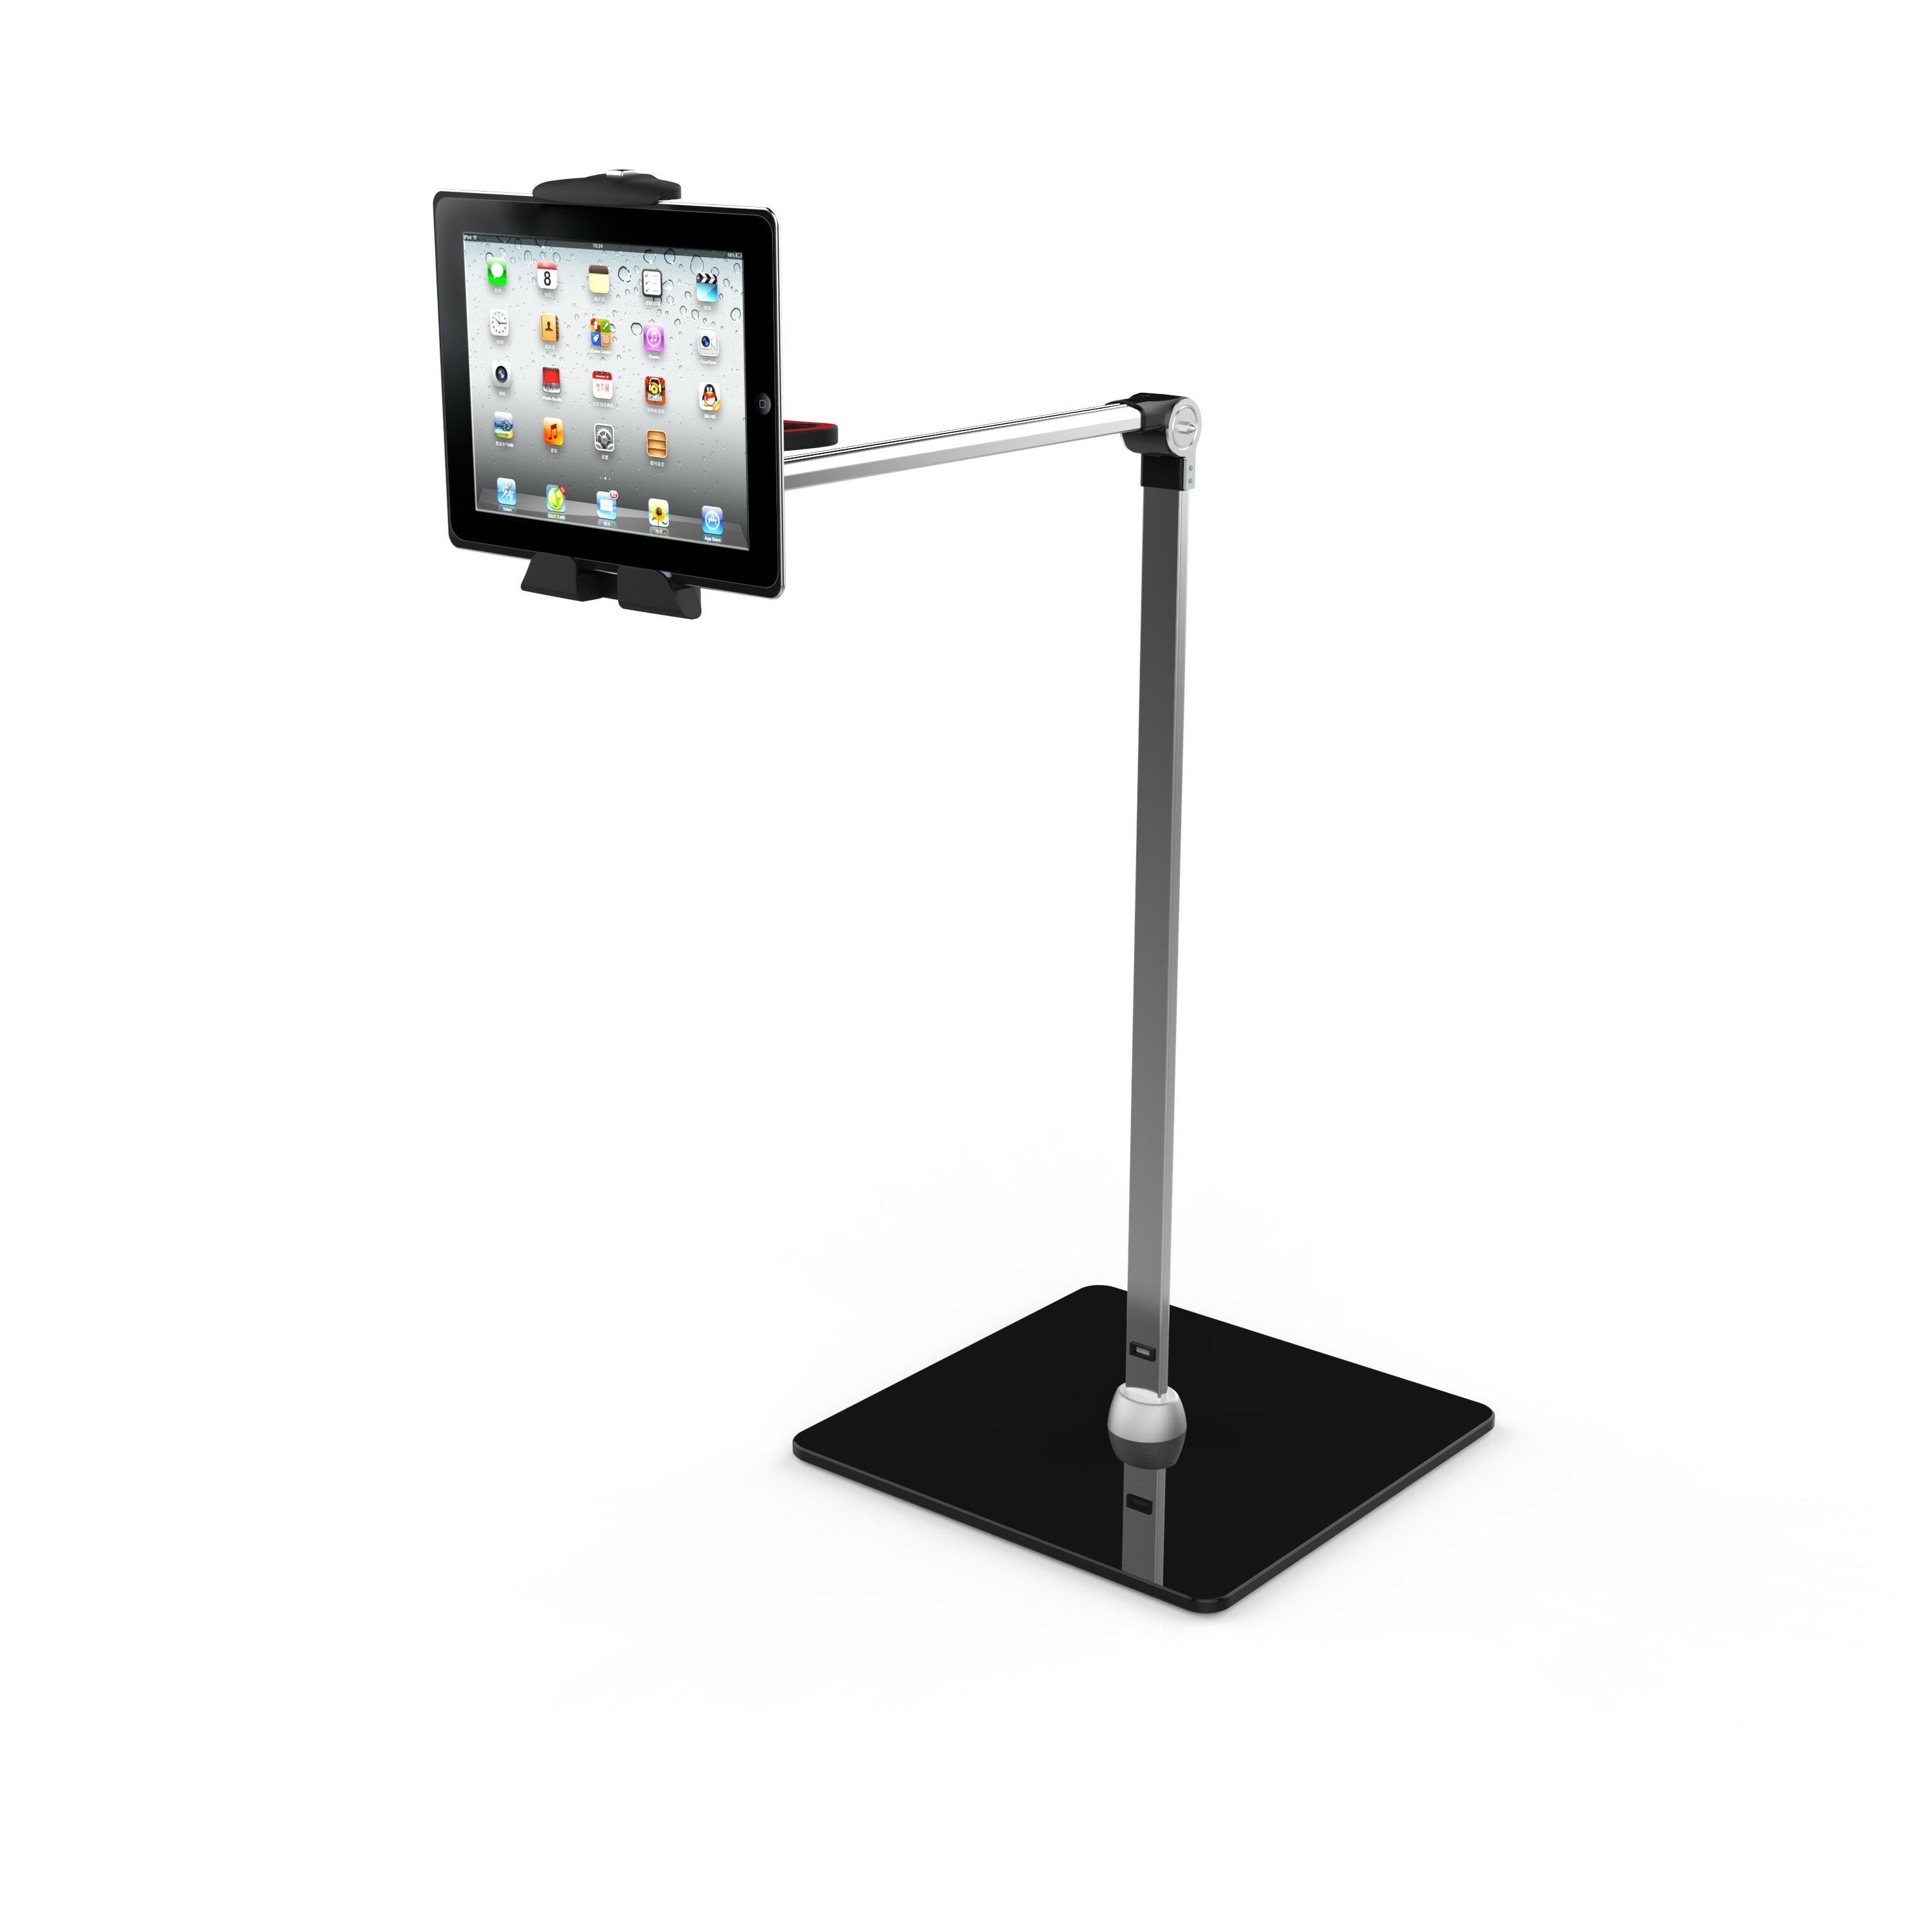 Deluxe Comfort IPad Or Tablet PC Floor Stand LY FS16 IPB16 